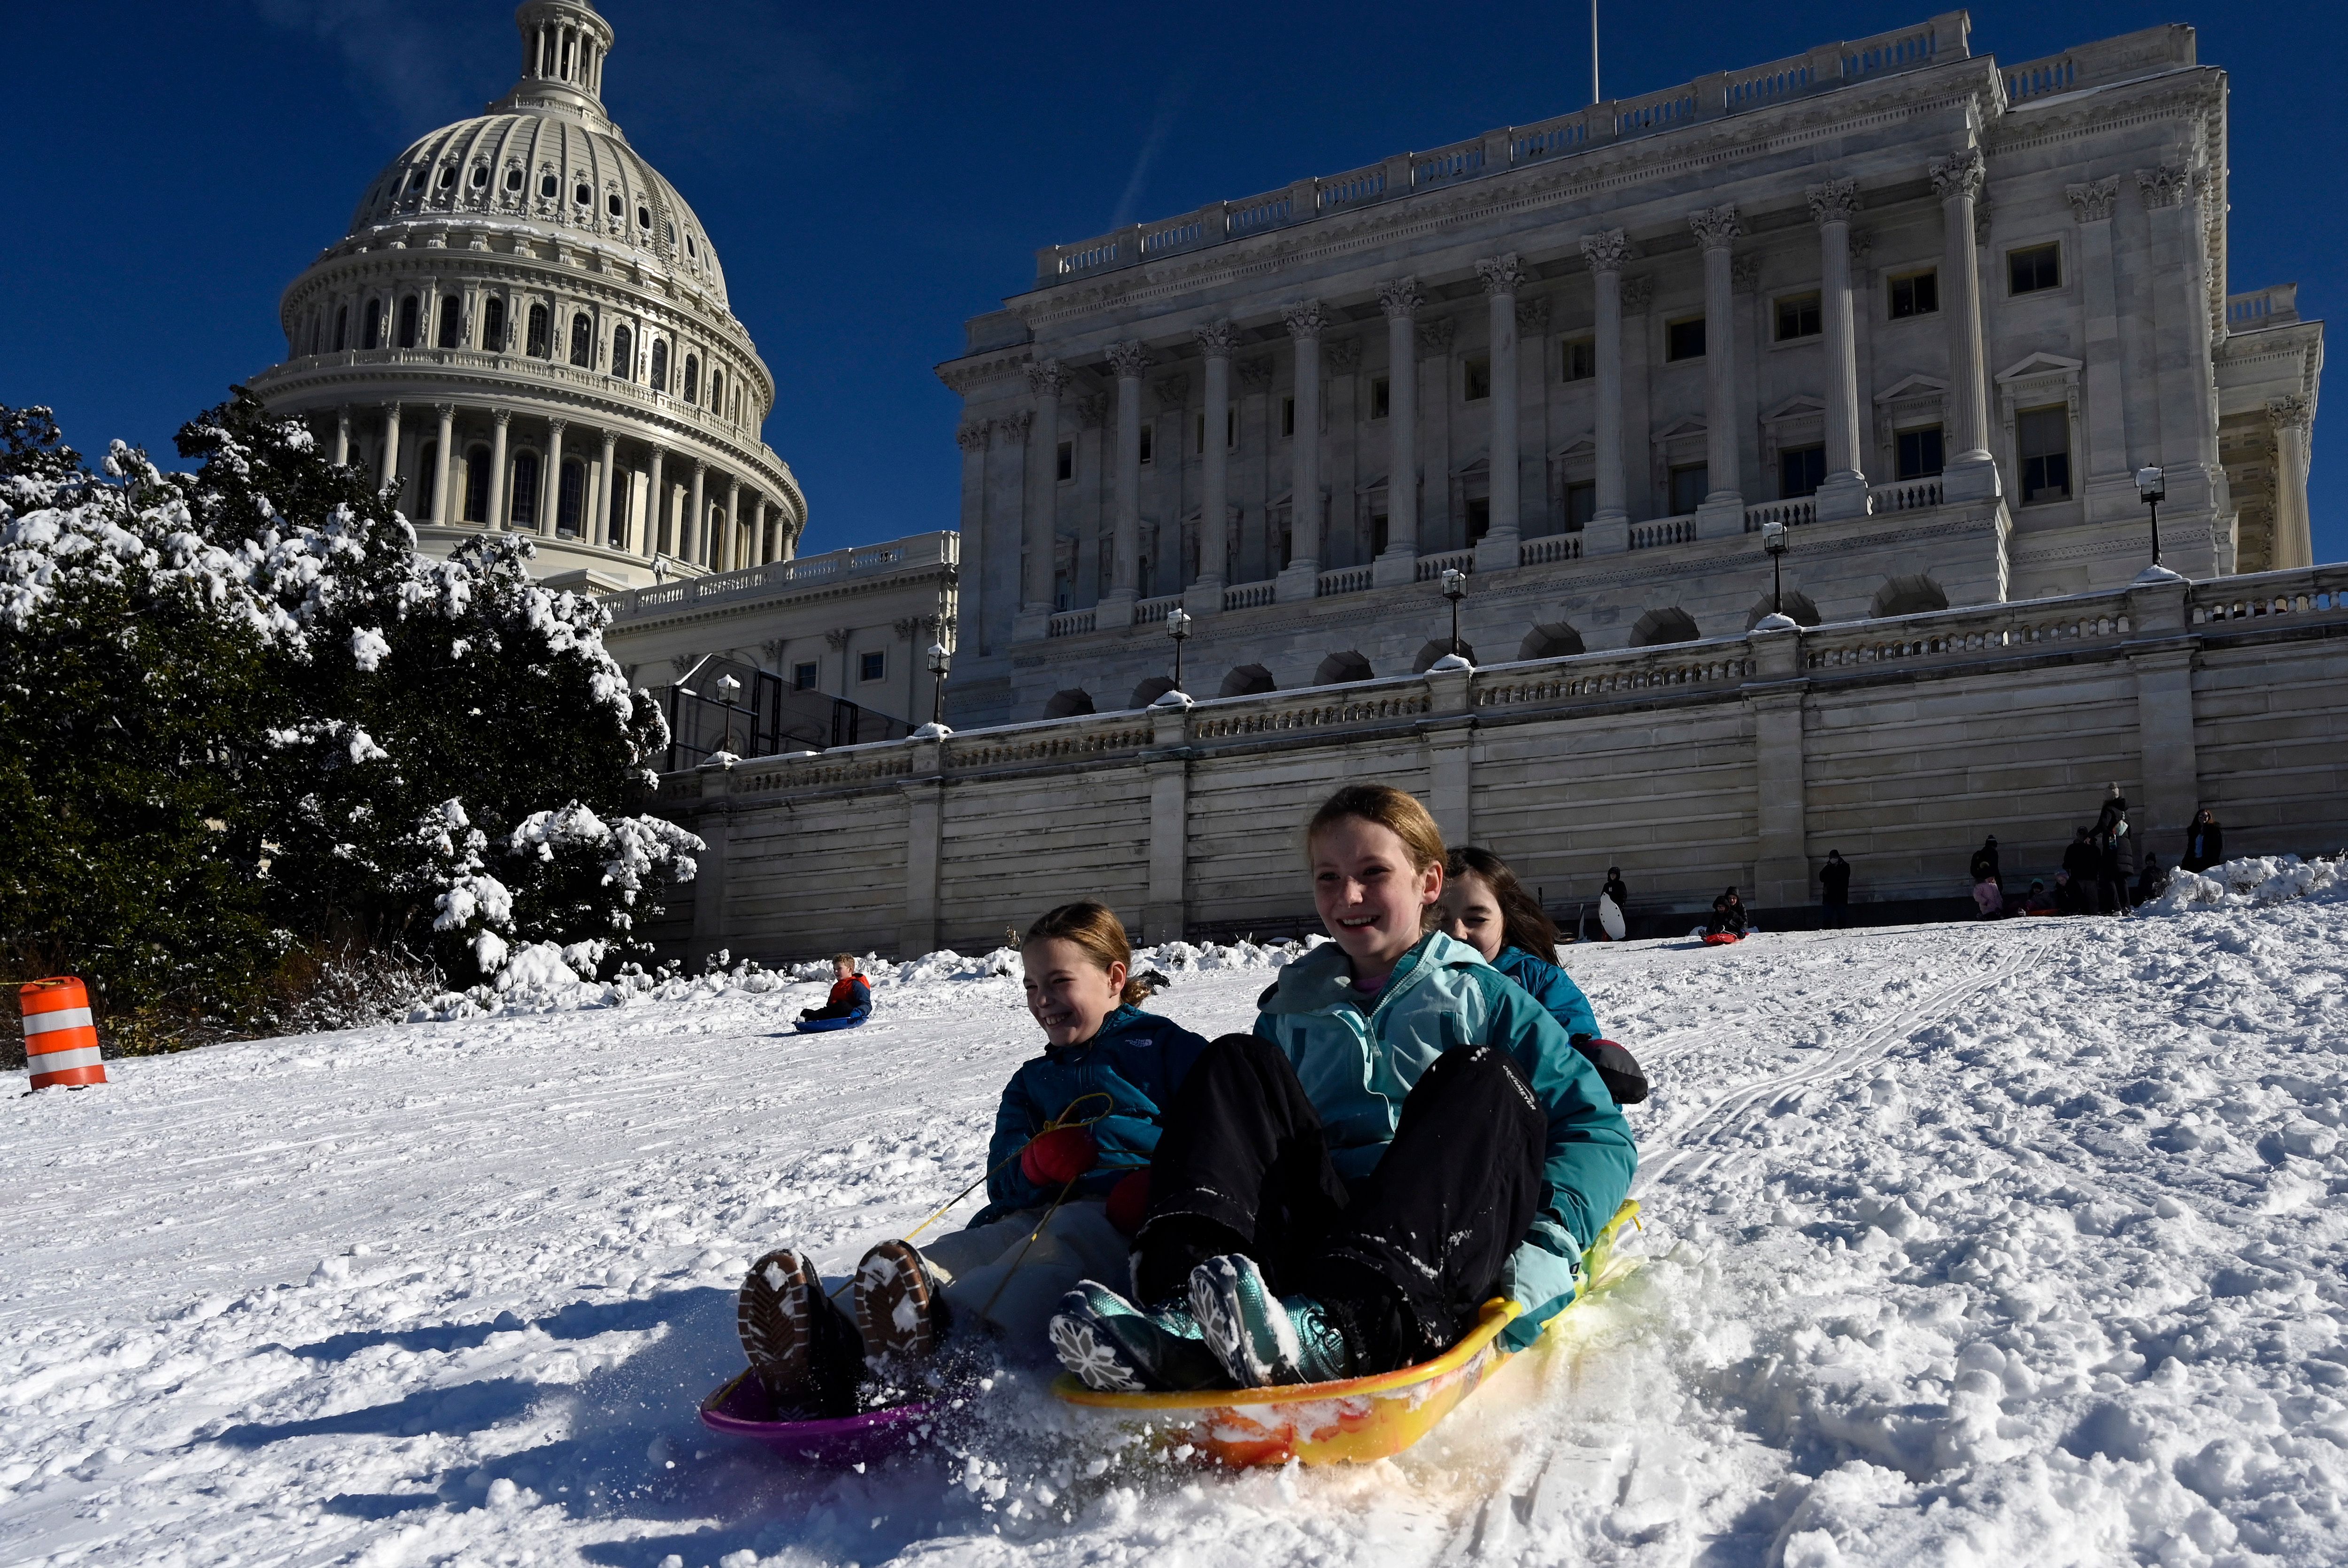 Children sled on the U.S. Capitol front lawn with the building in the background